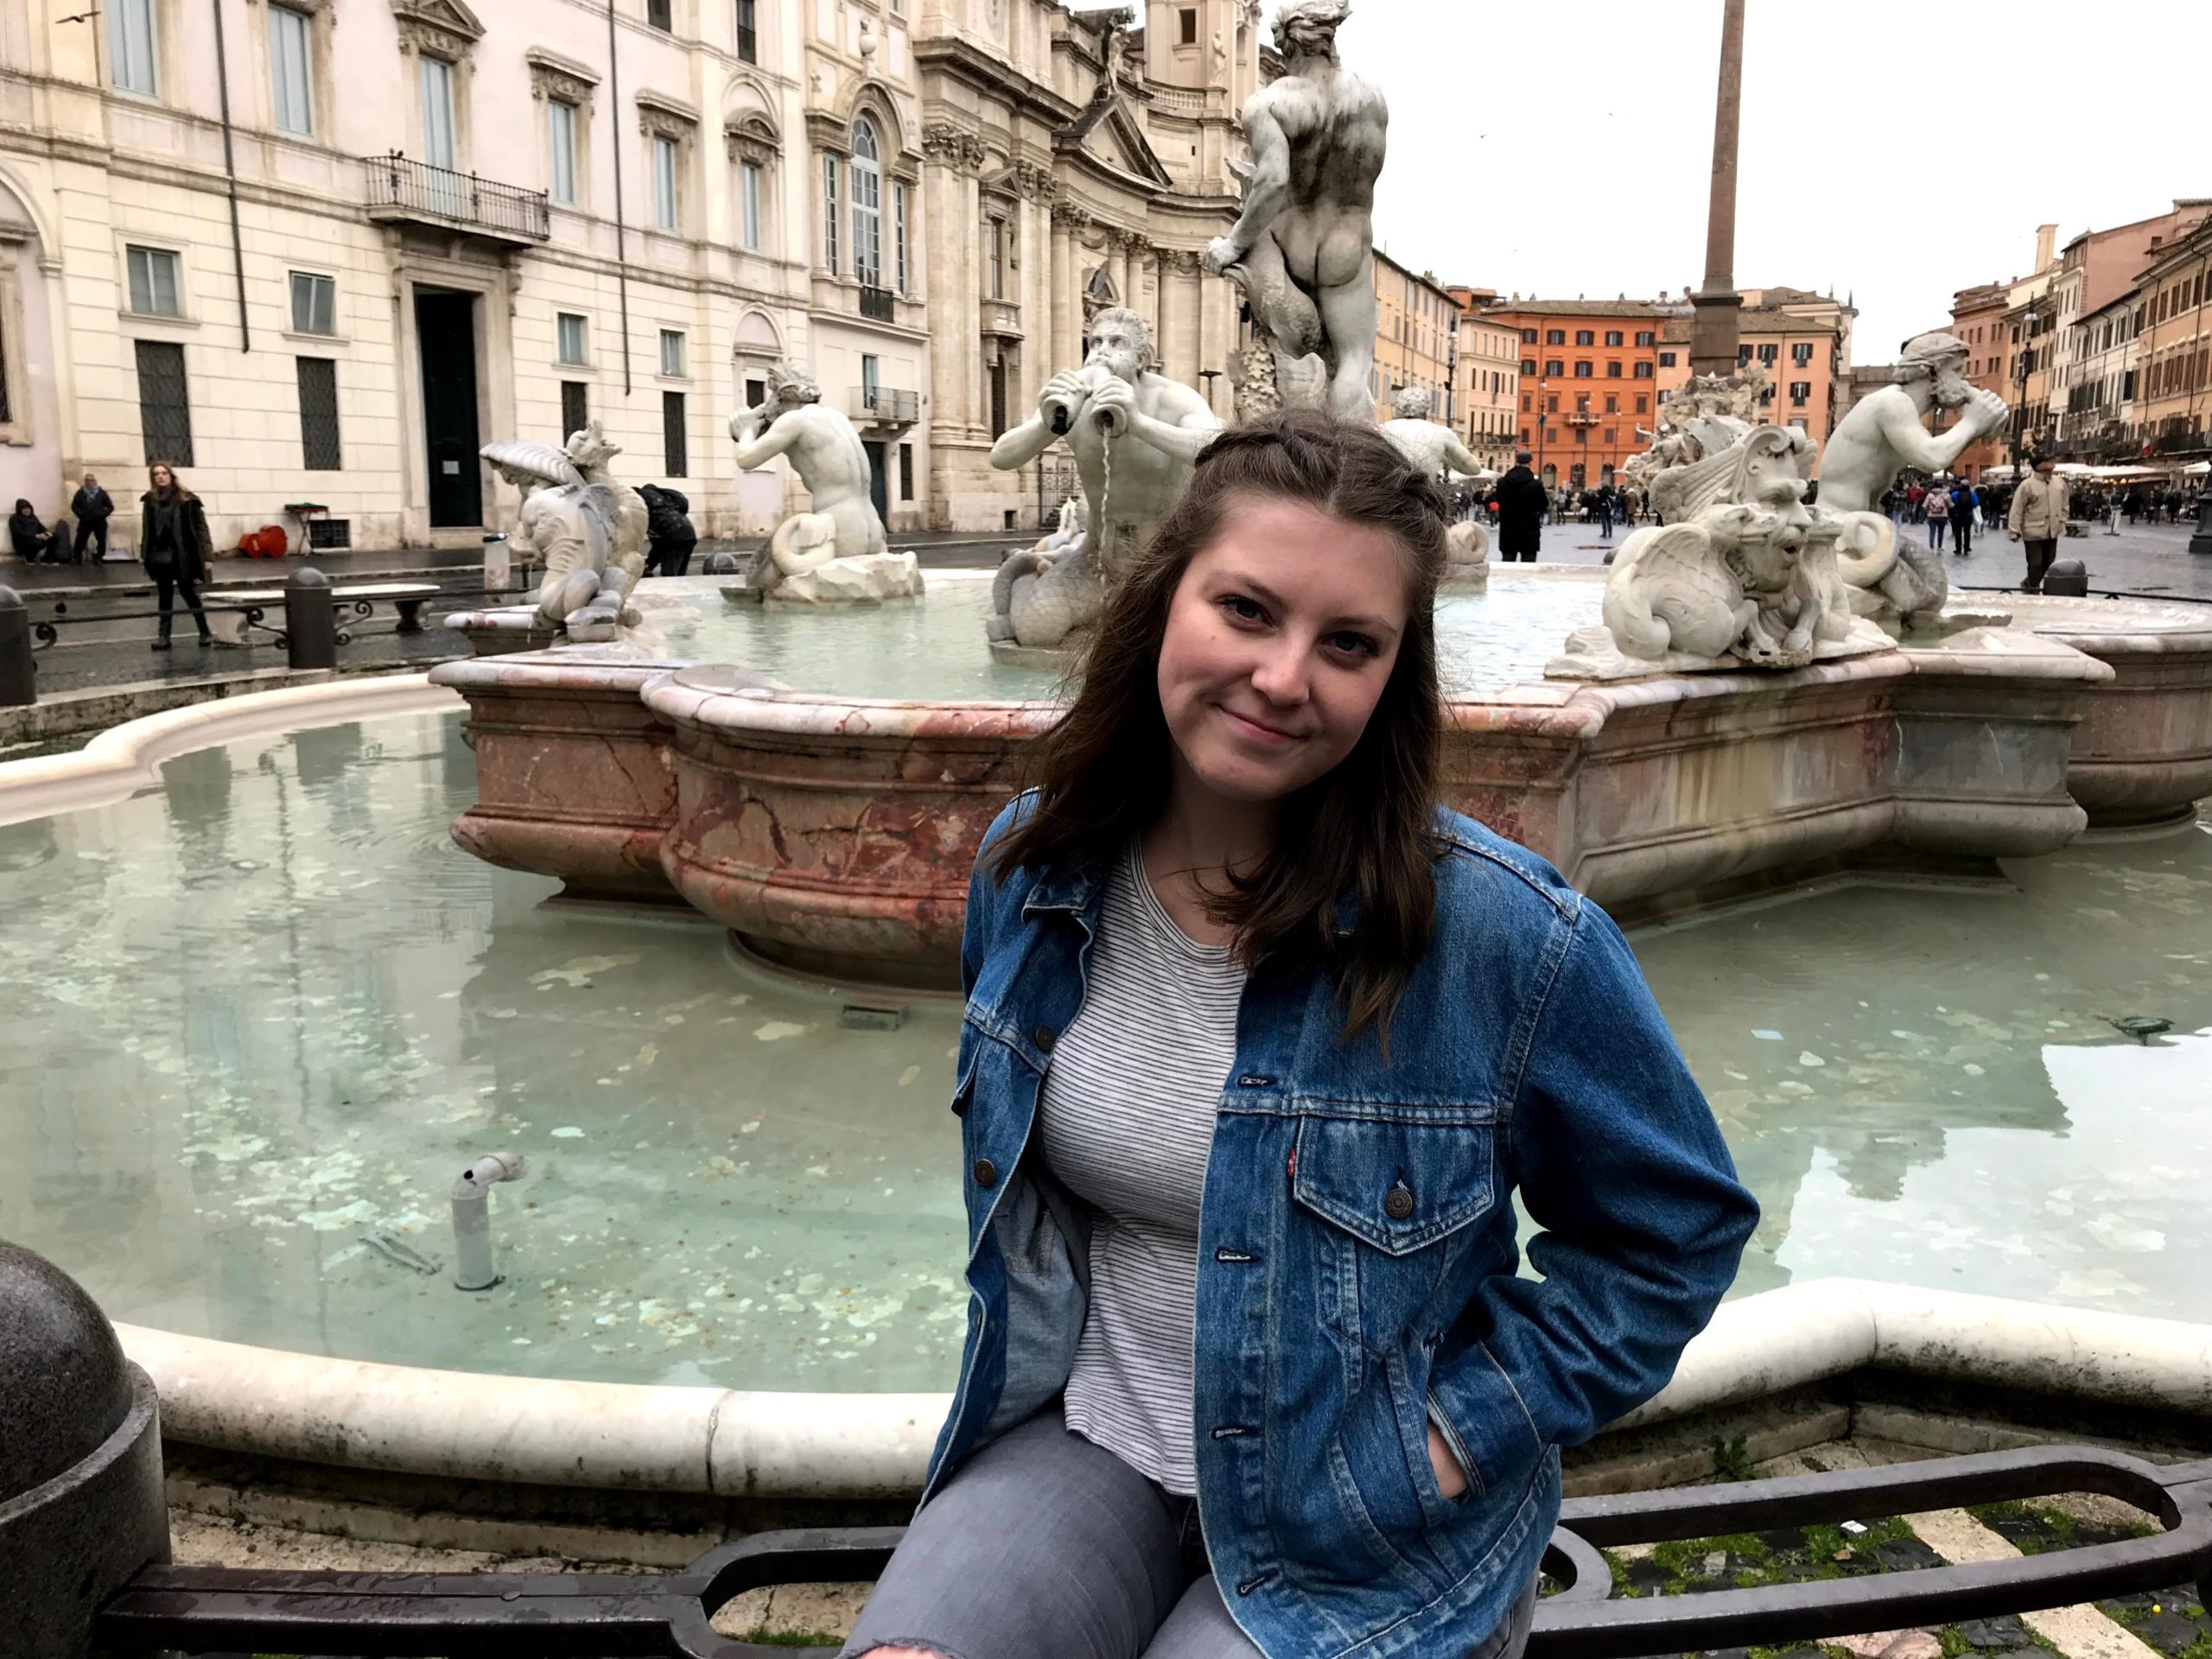 A young woman sitting in front of a fountain with buildings in the background.